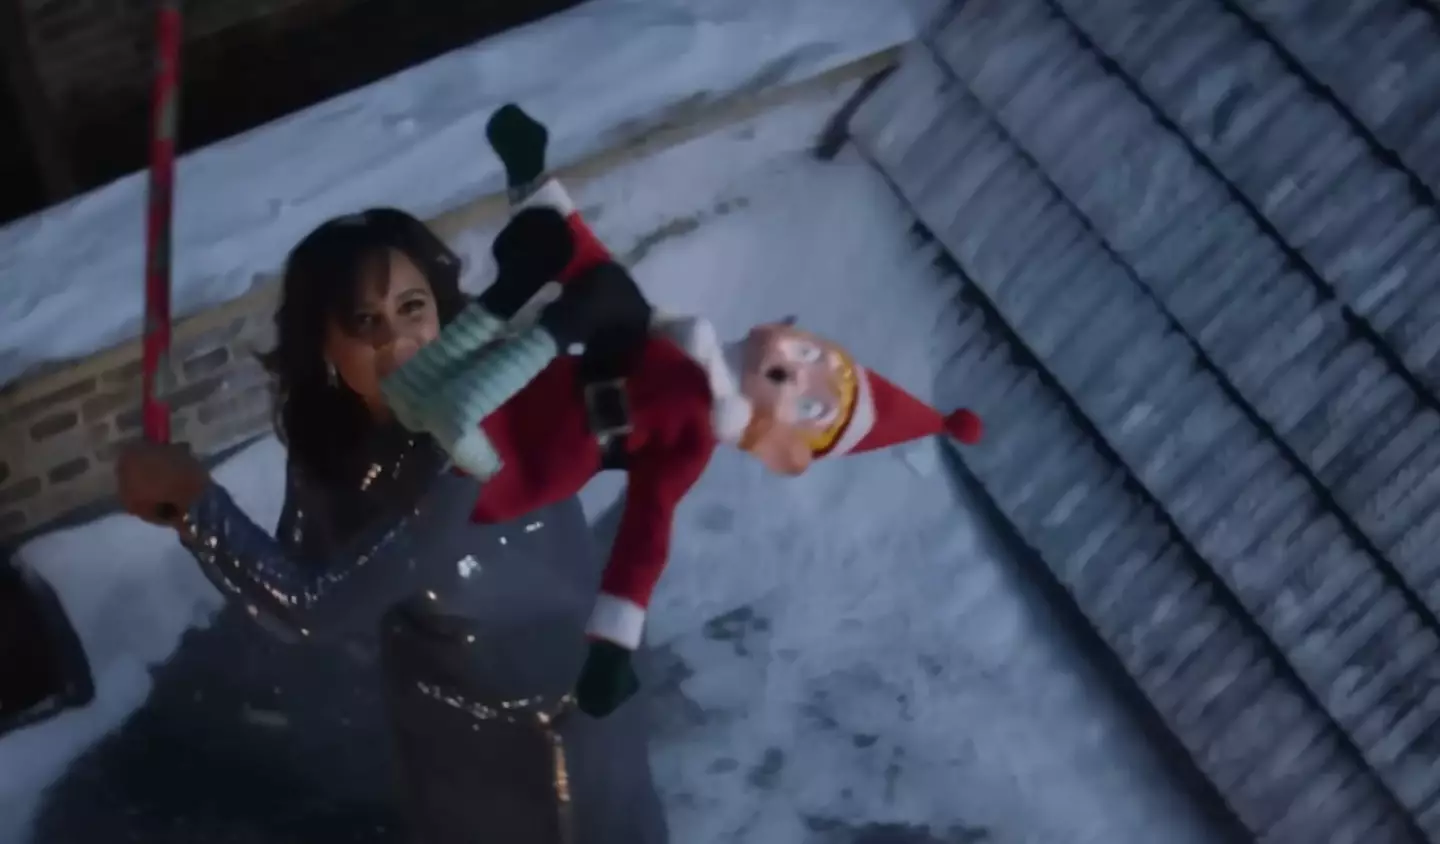 Brits said the advert bizarrely discouraged much-loved festive traditions.